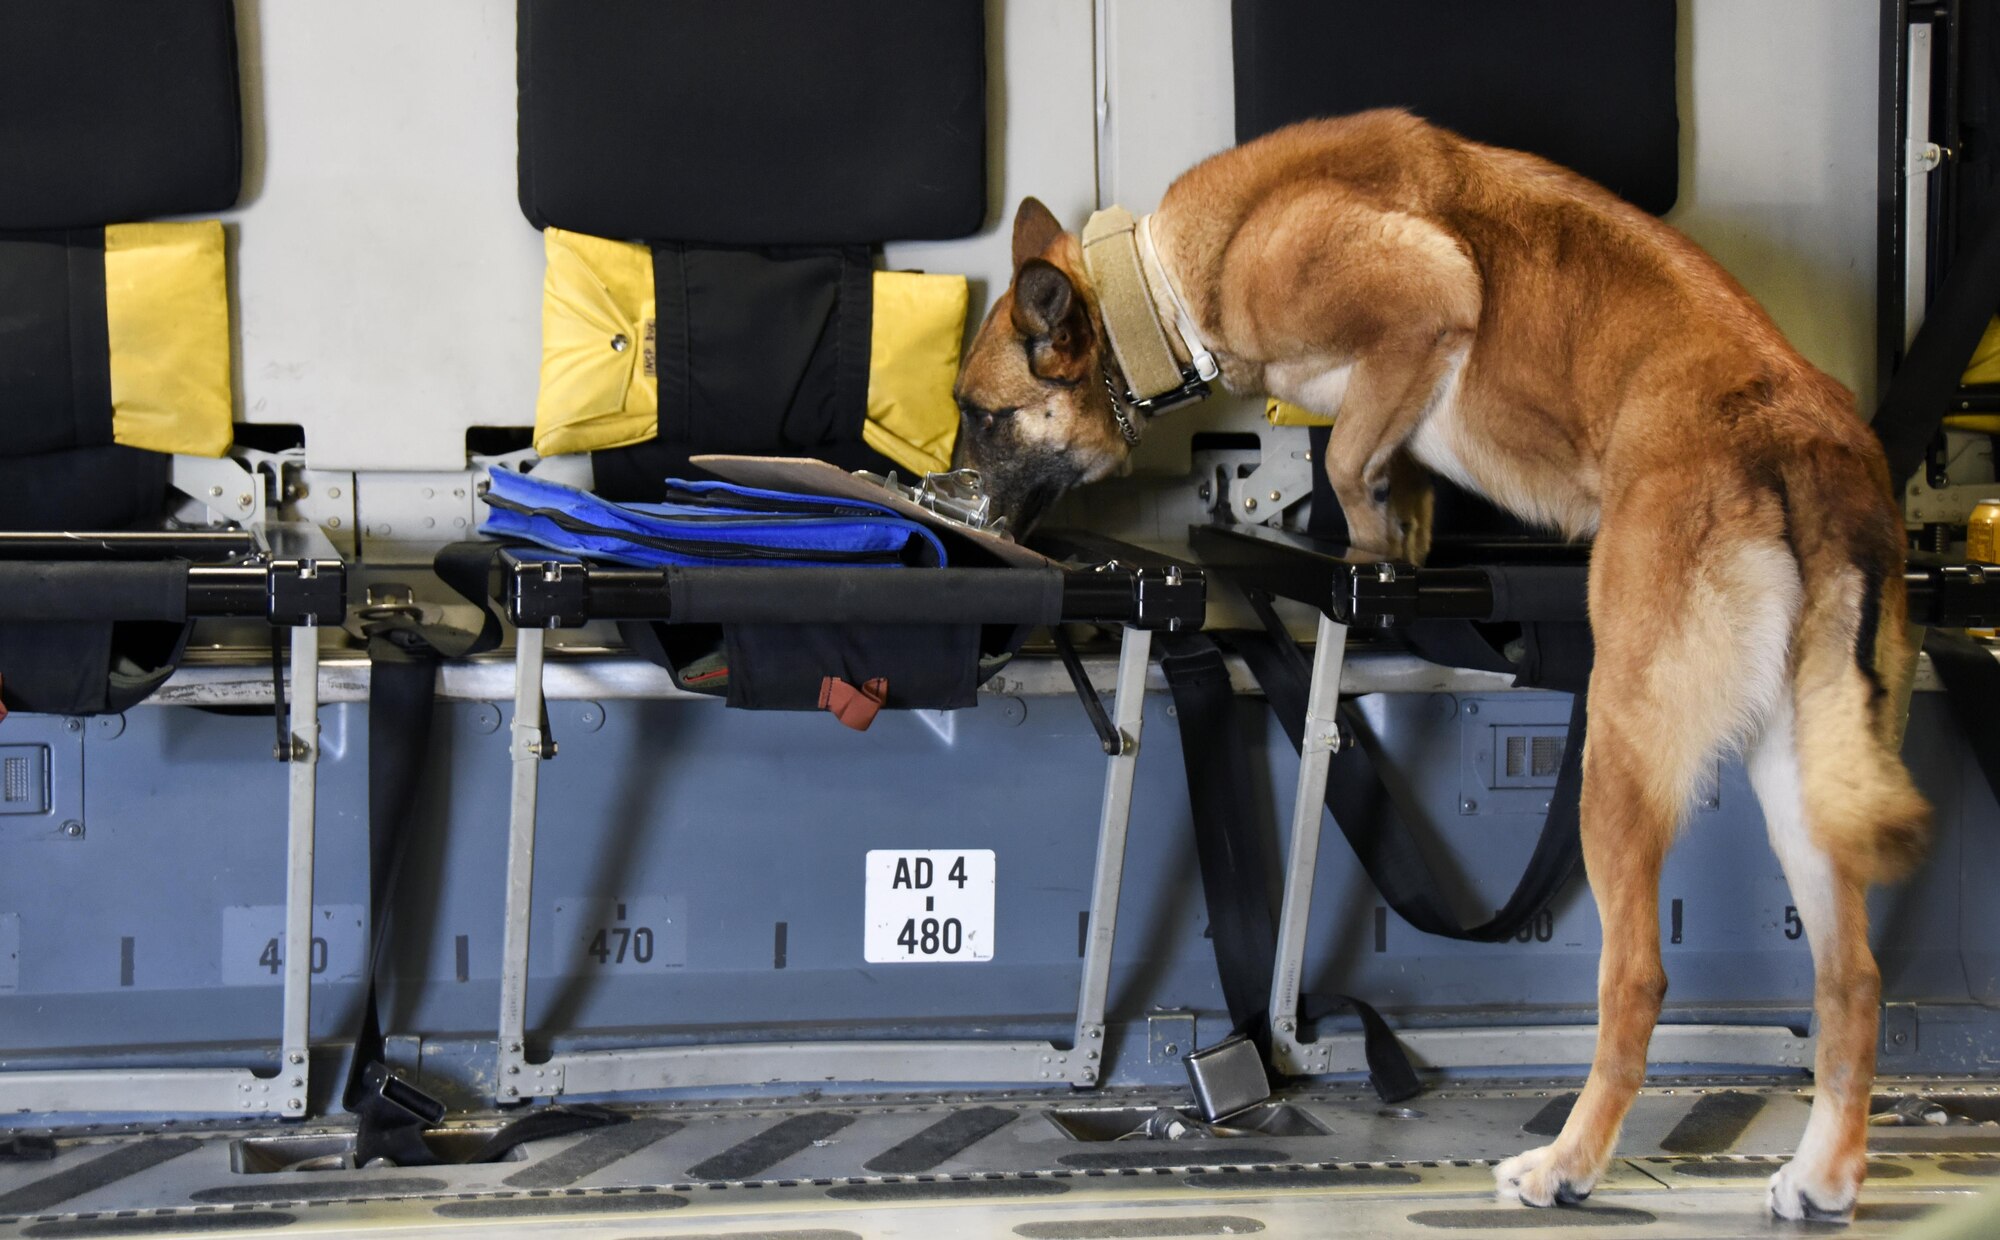 U.S. Air Force military working dog Pprada, with the 379th Expeditionary Security Forces Squadron, smells a seat in a C-17 Globemaster III during detection training at Al Udeid Air Base, Qatar, April 15, 2017. This training was designed to introduce the canines to a new environment that they may not have had previous exposure to. (U.S. Air Force photo by Senior Airman Cynthia A. Innocenti)